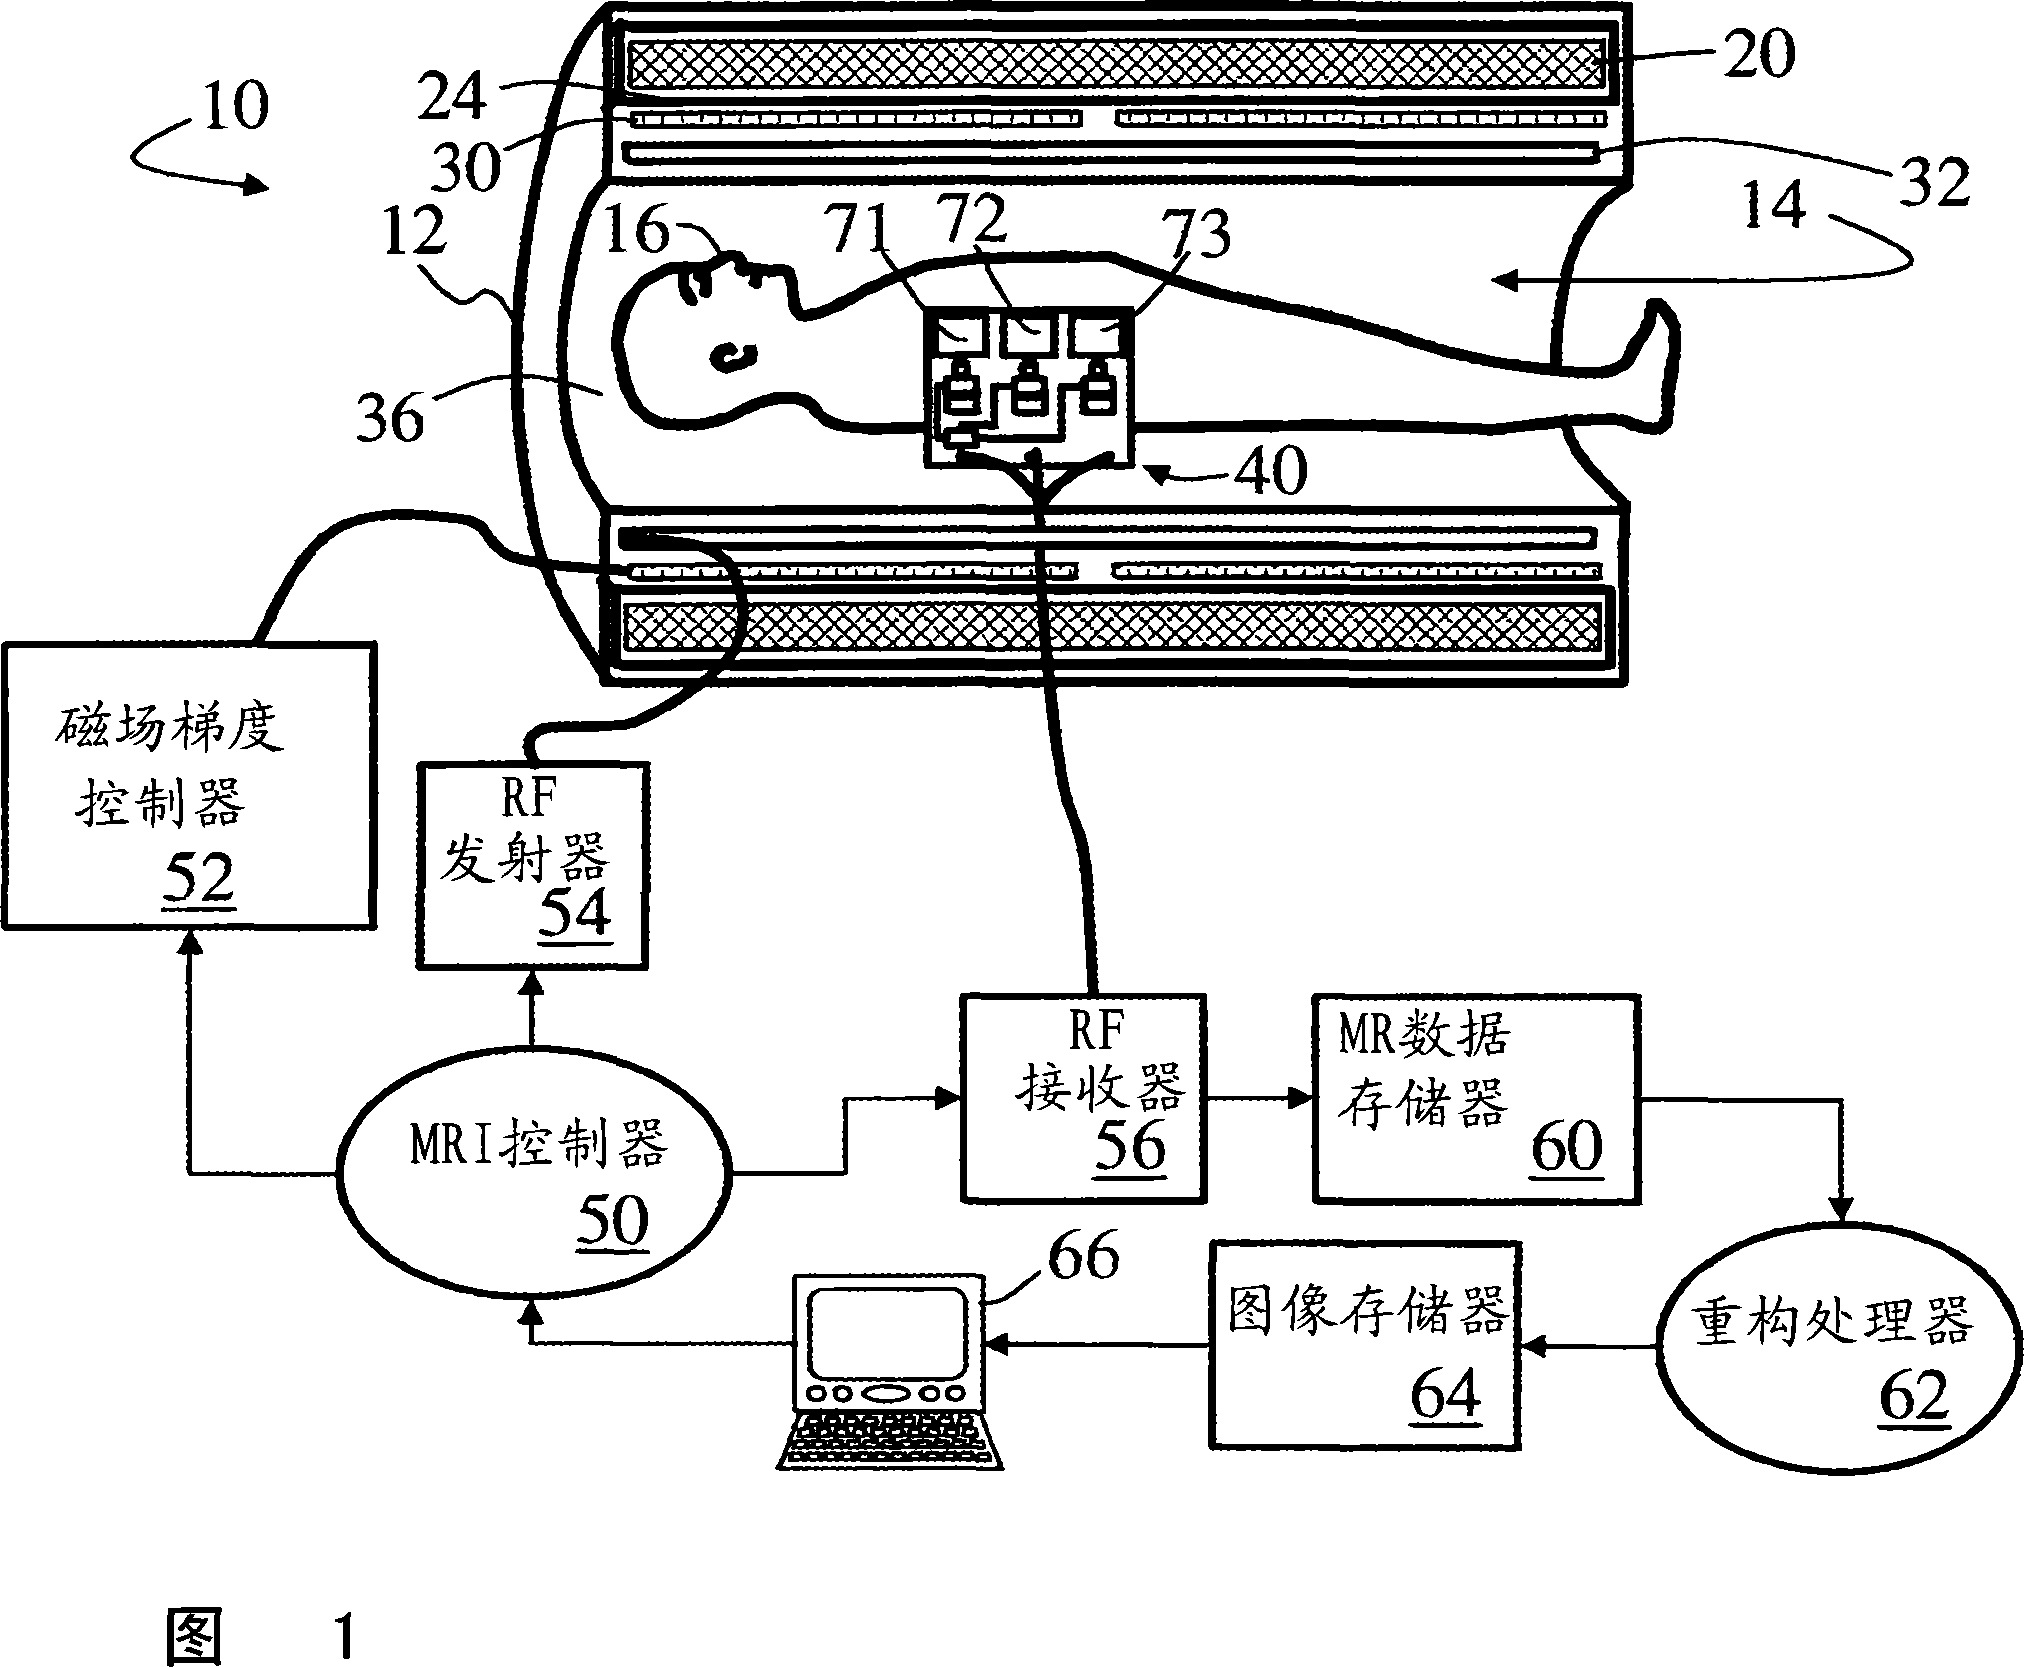 Methods and apparatuses for connecting receive coils in magnetic resonance imaging scanners